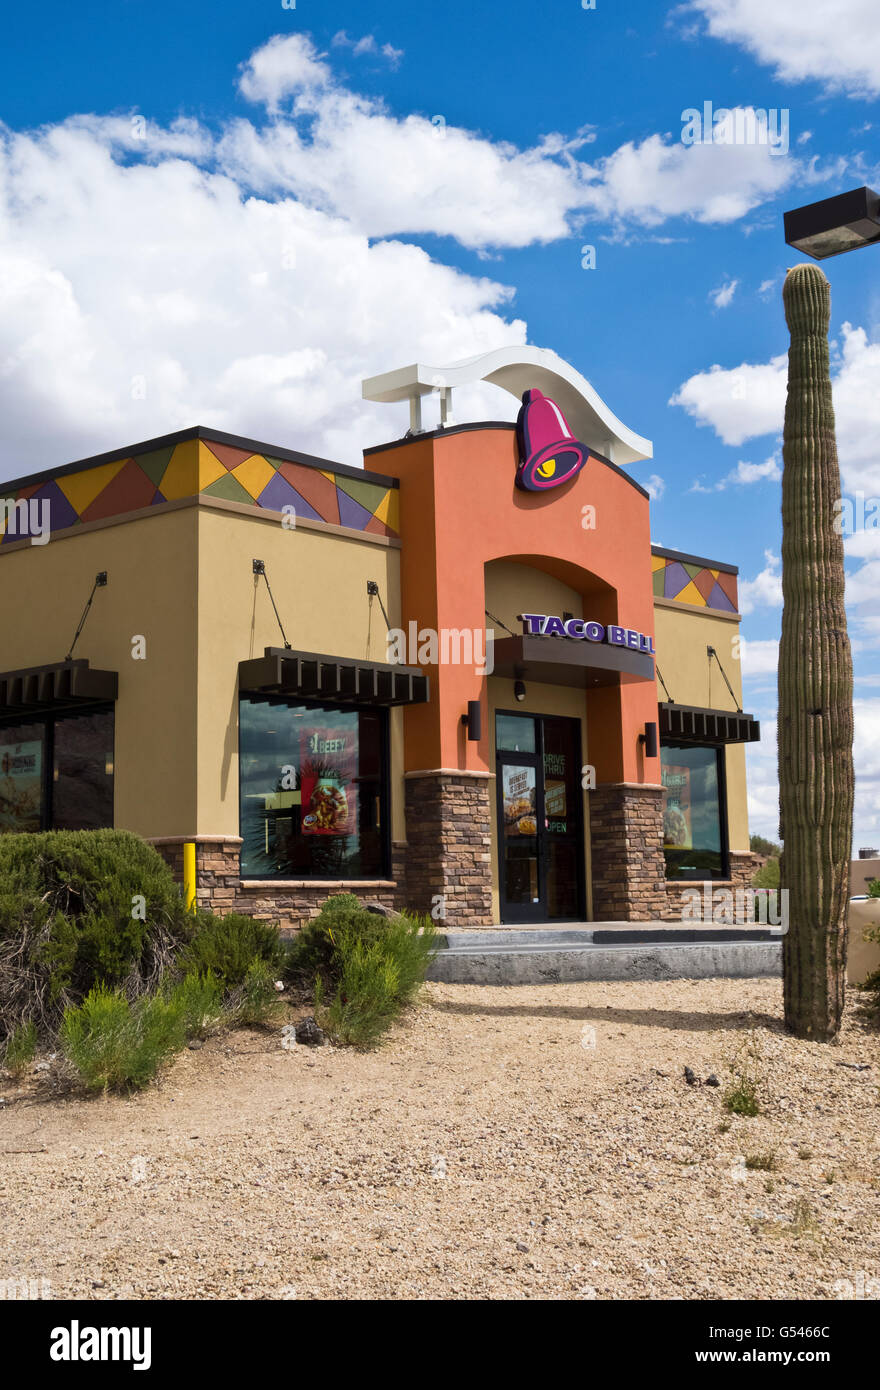 Taco Bell restaurant along the side of an Arizona highway. Stock Photo